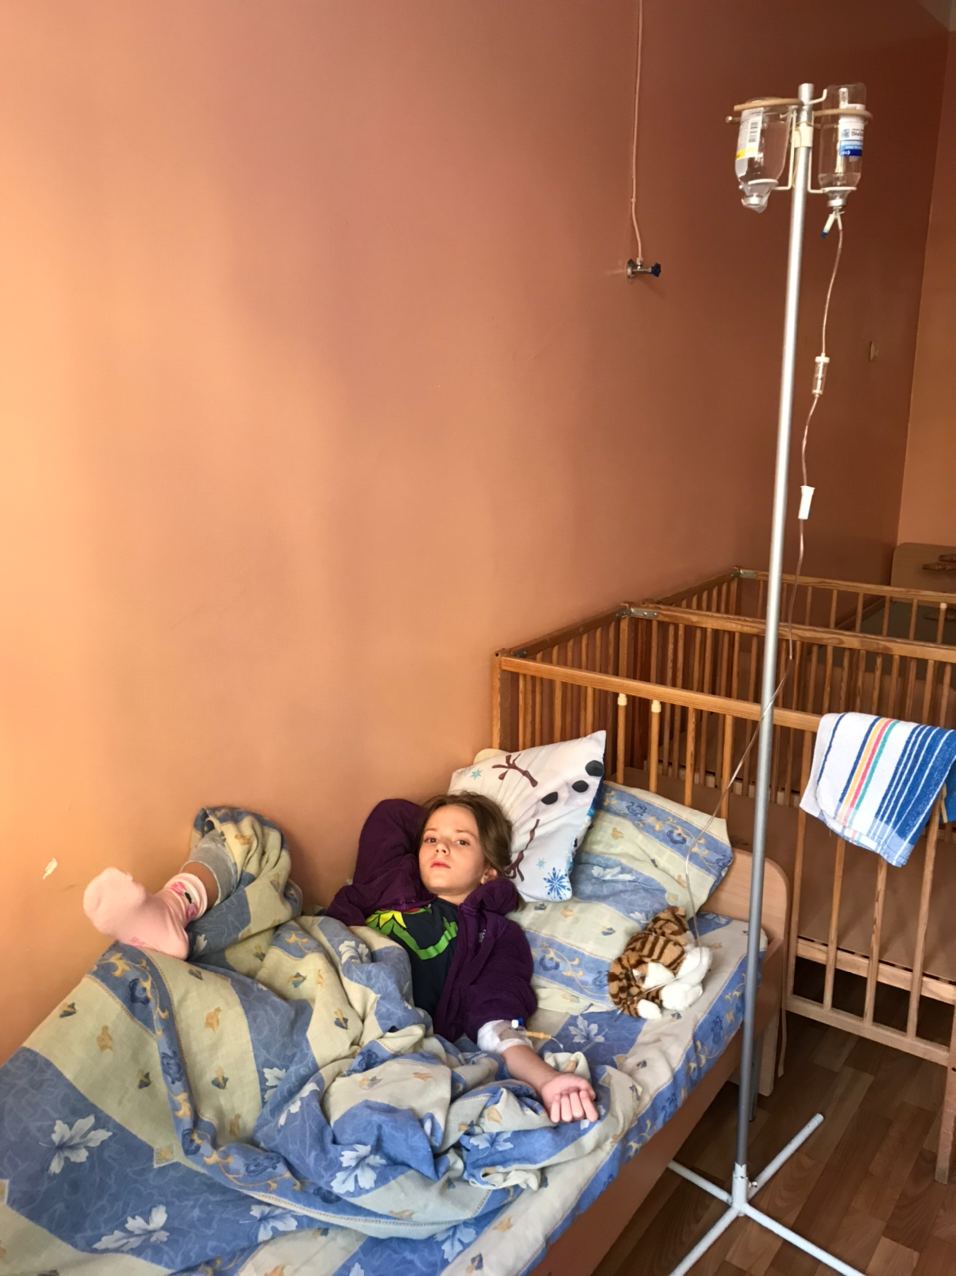 Dasha Makarenko, 10, who has type one diabetes, urgently needed medication after her family fled their home in Chernihiv, northern Ukraine.